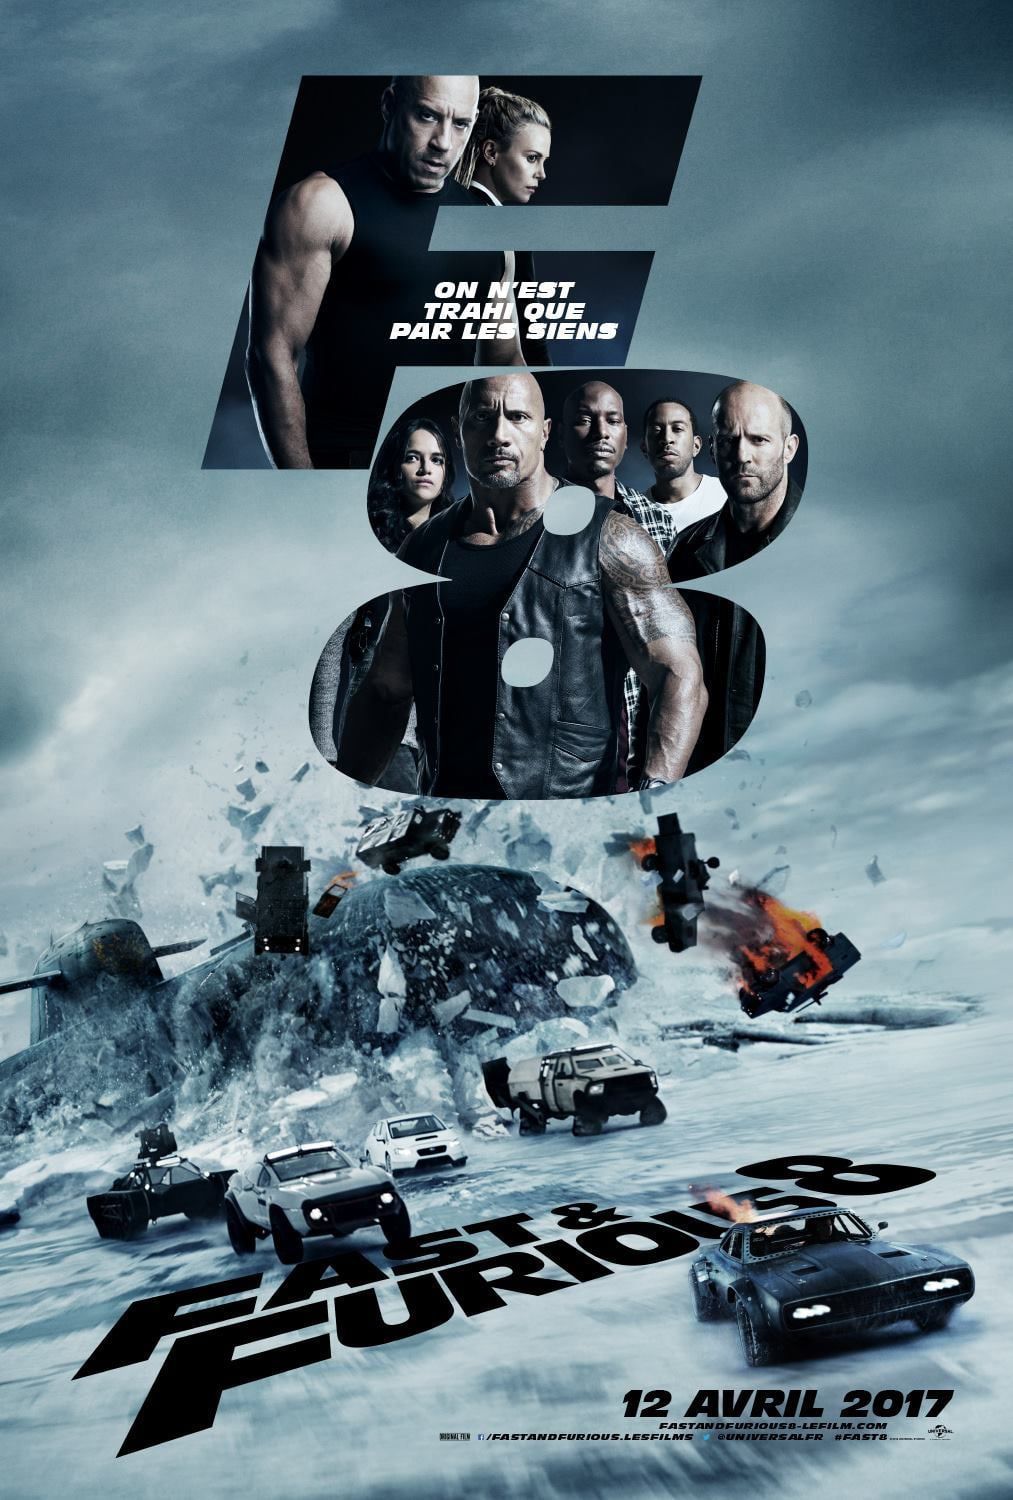 Fast & Furious 8 - Film (2017) streaming VF gratuit complet